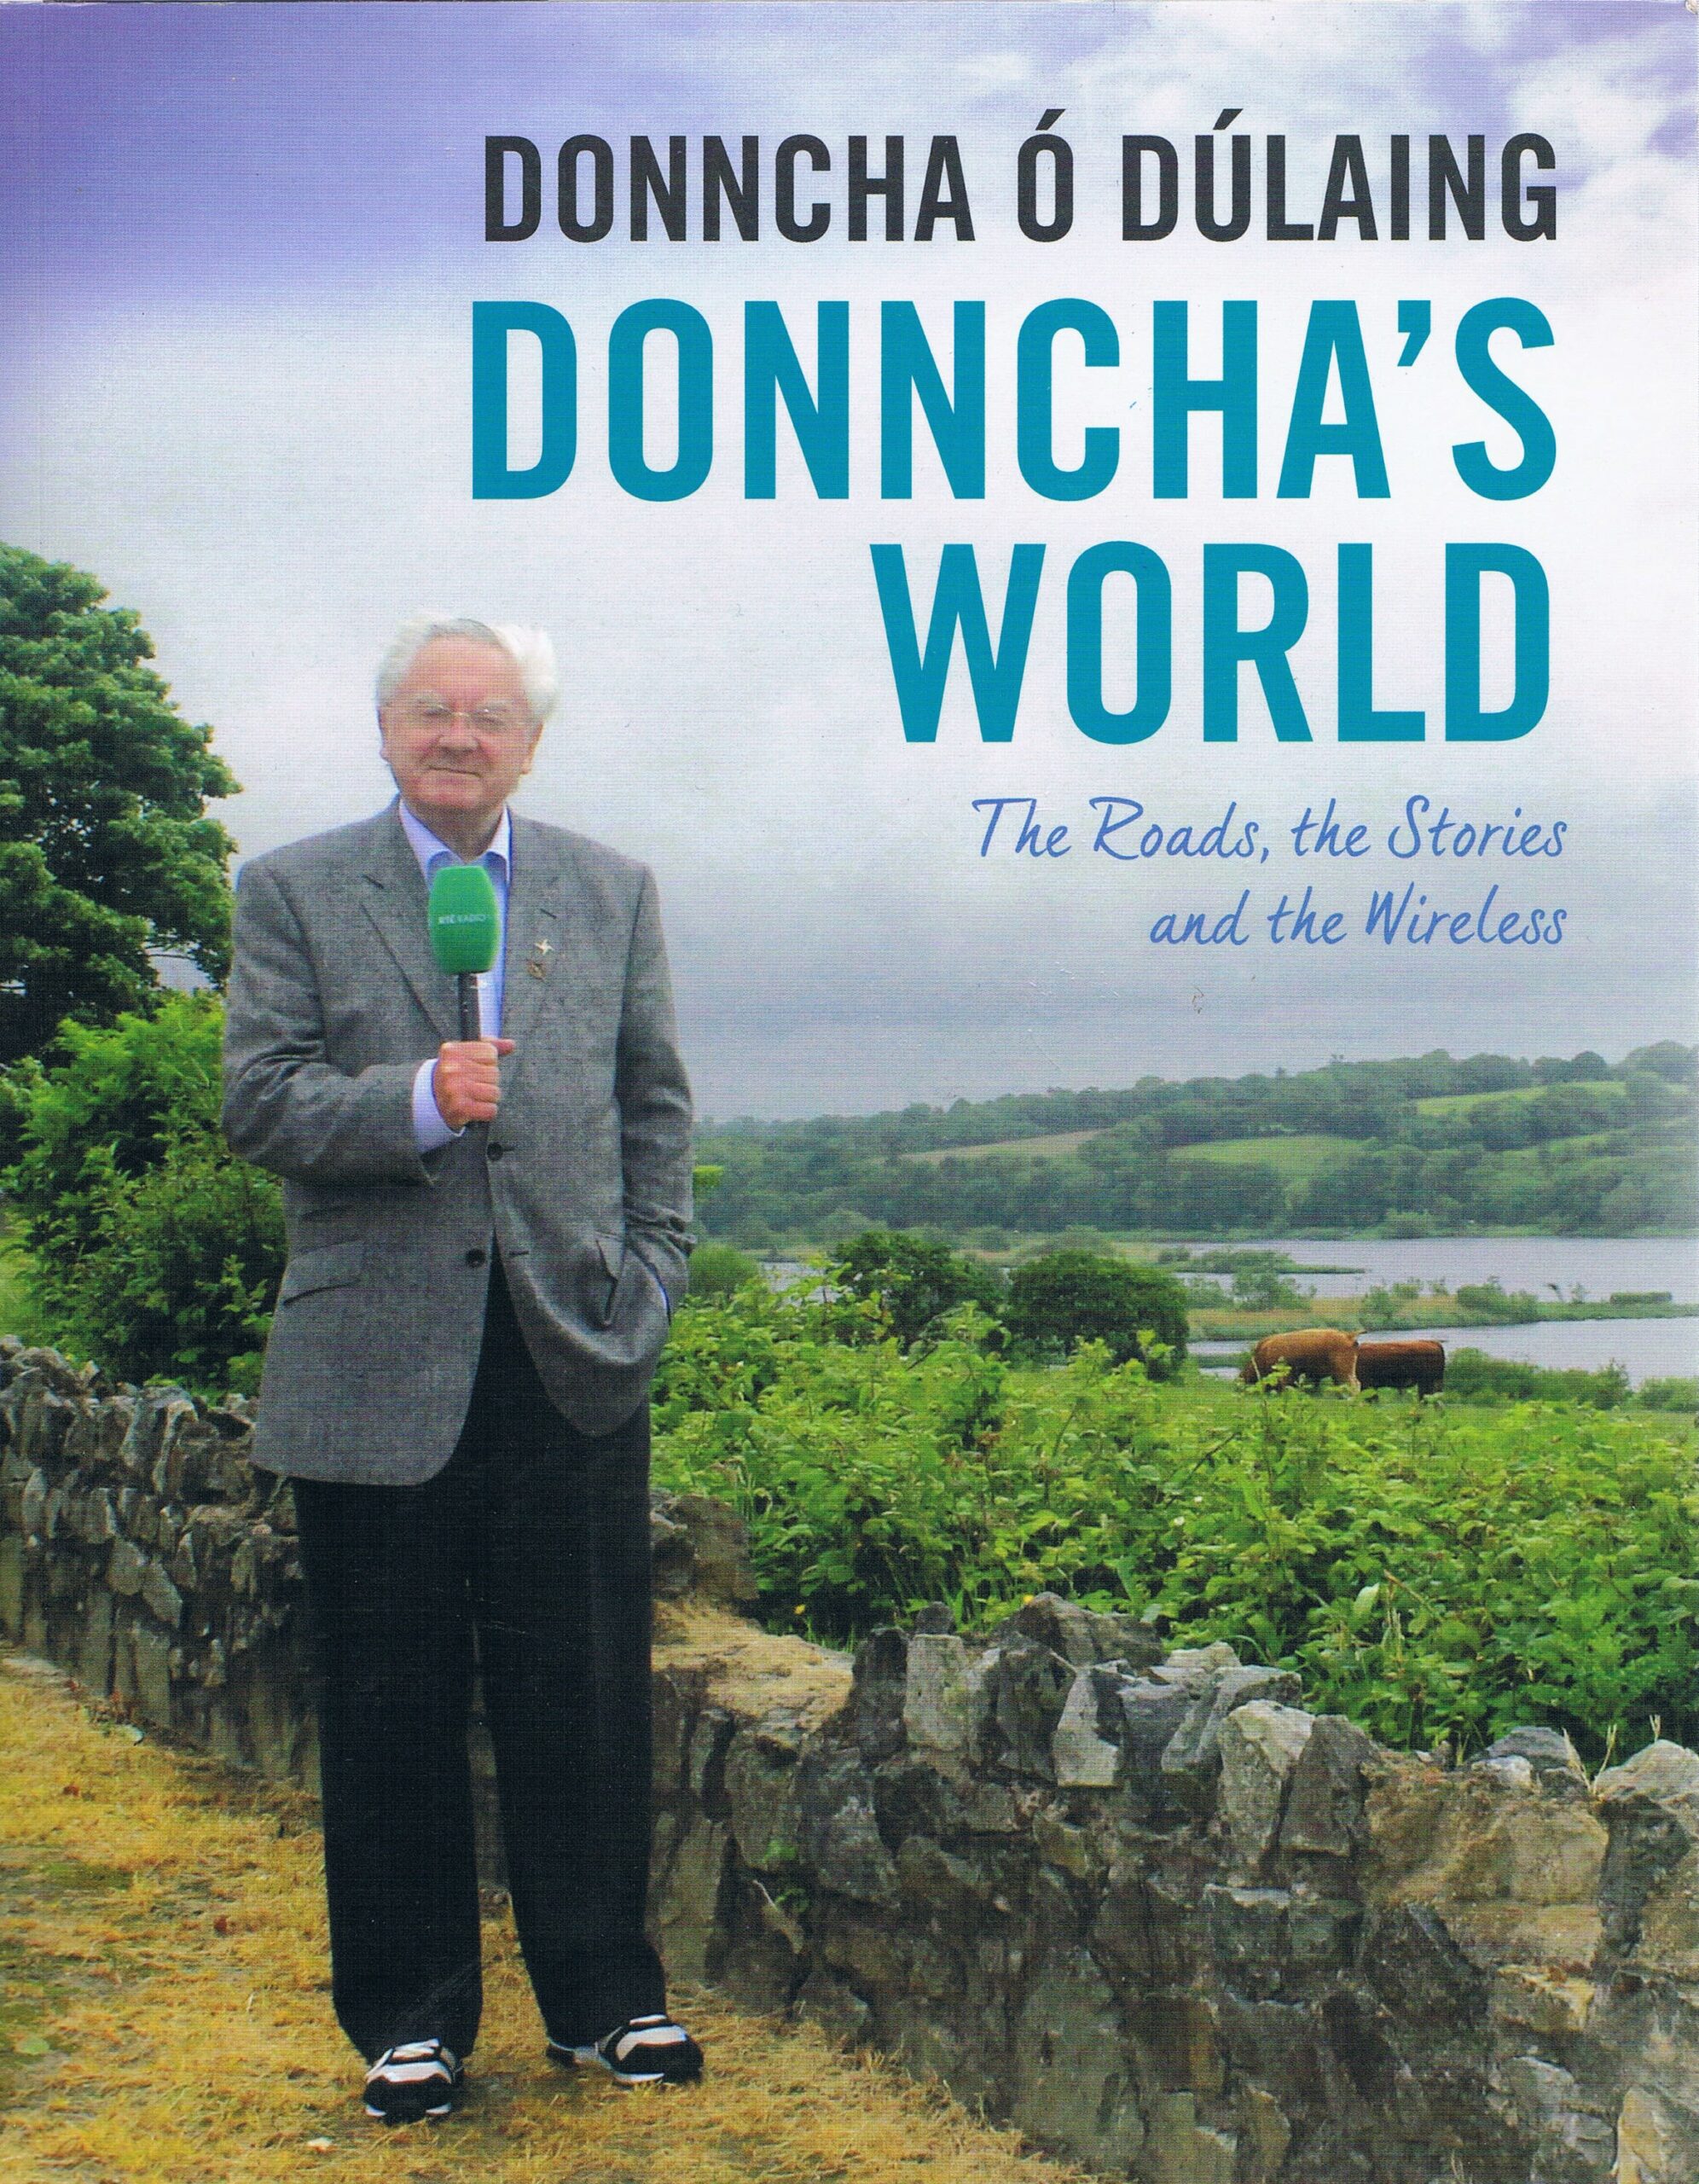 Donncha’s World: The Roads, the Stories and the Wireless | Donncha Ó Dúlaing | Charlie Byrne's